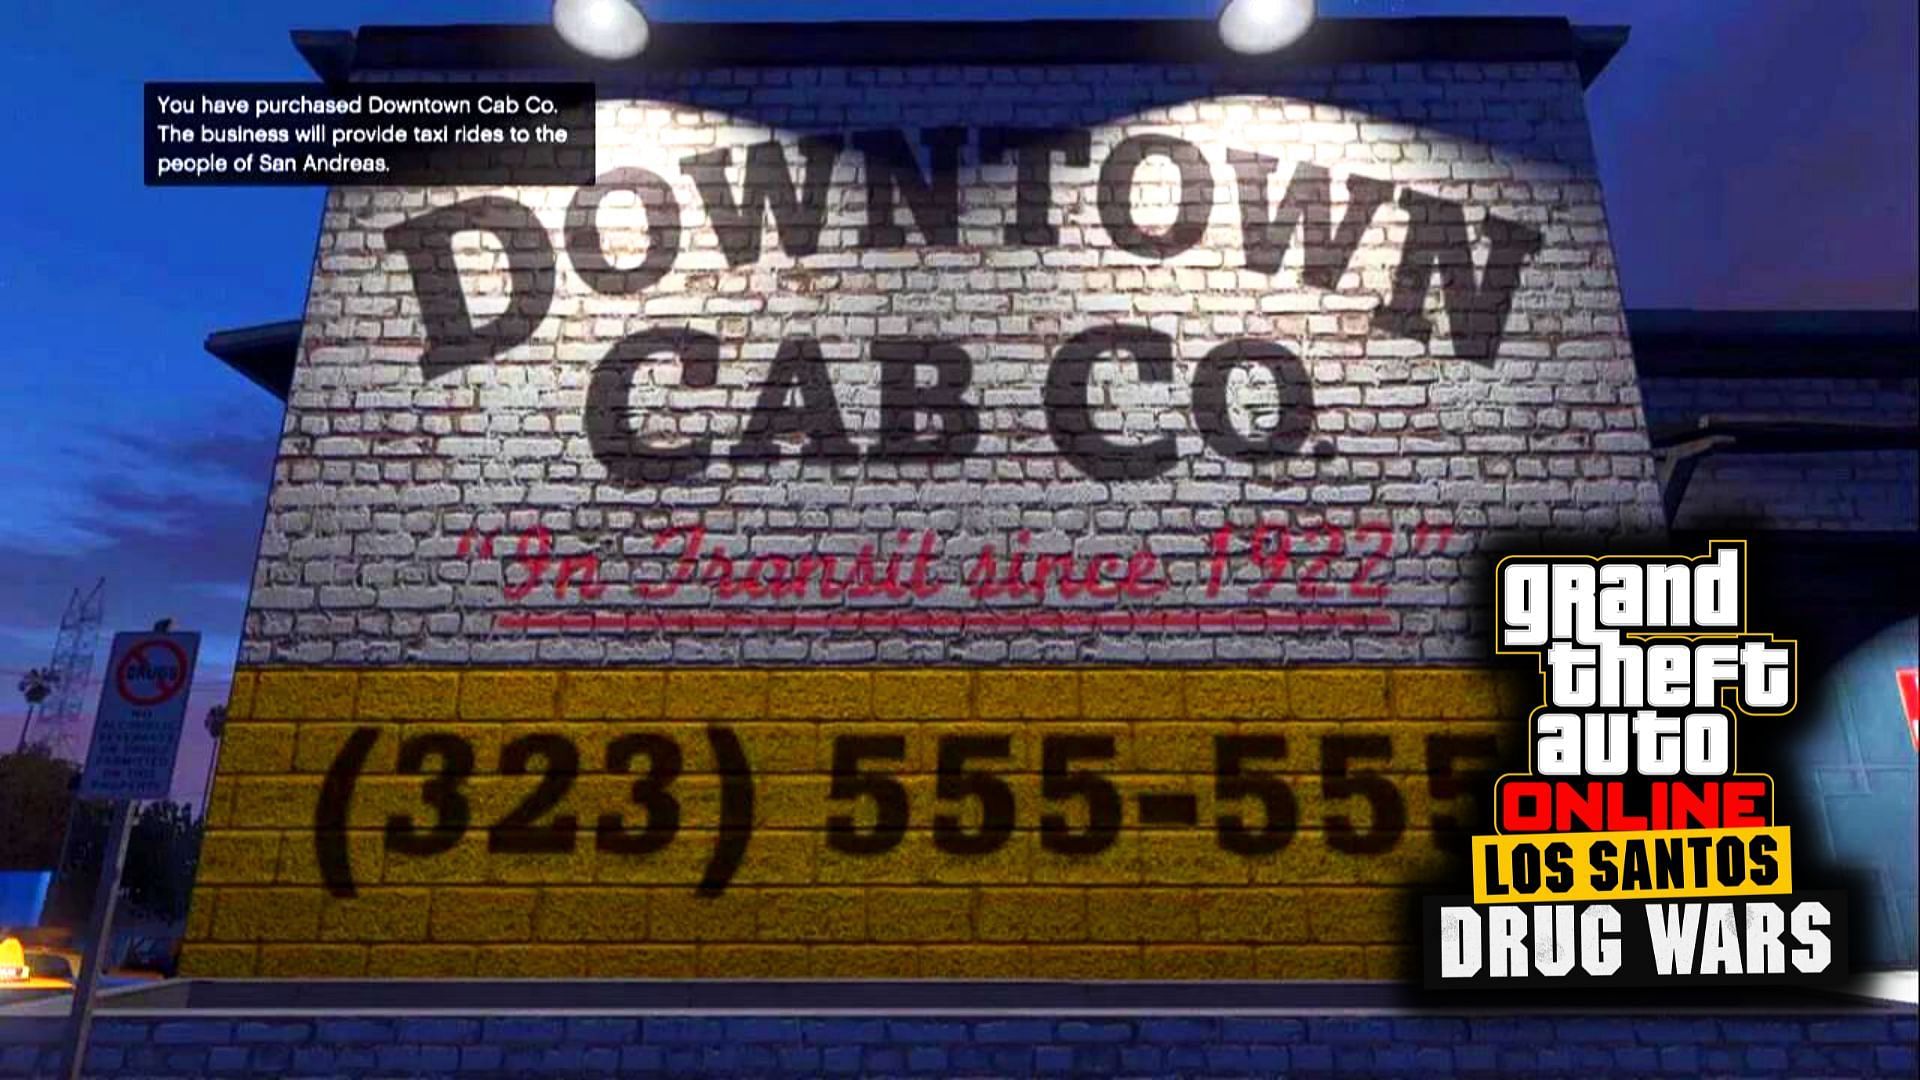 A brief about upcoming Downtown Cab Co. as GTA Online Los Santos Drug Wars update drip feed (Image via Rockstar Games)